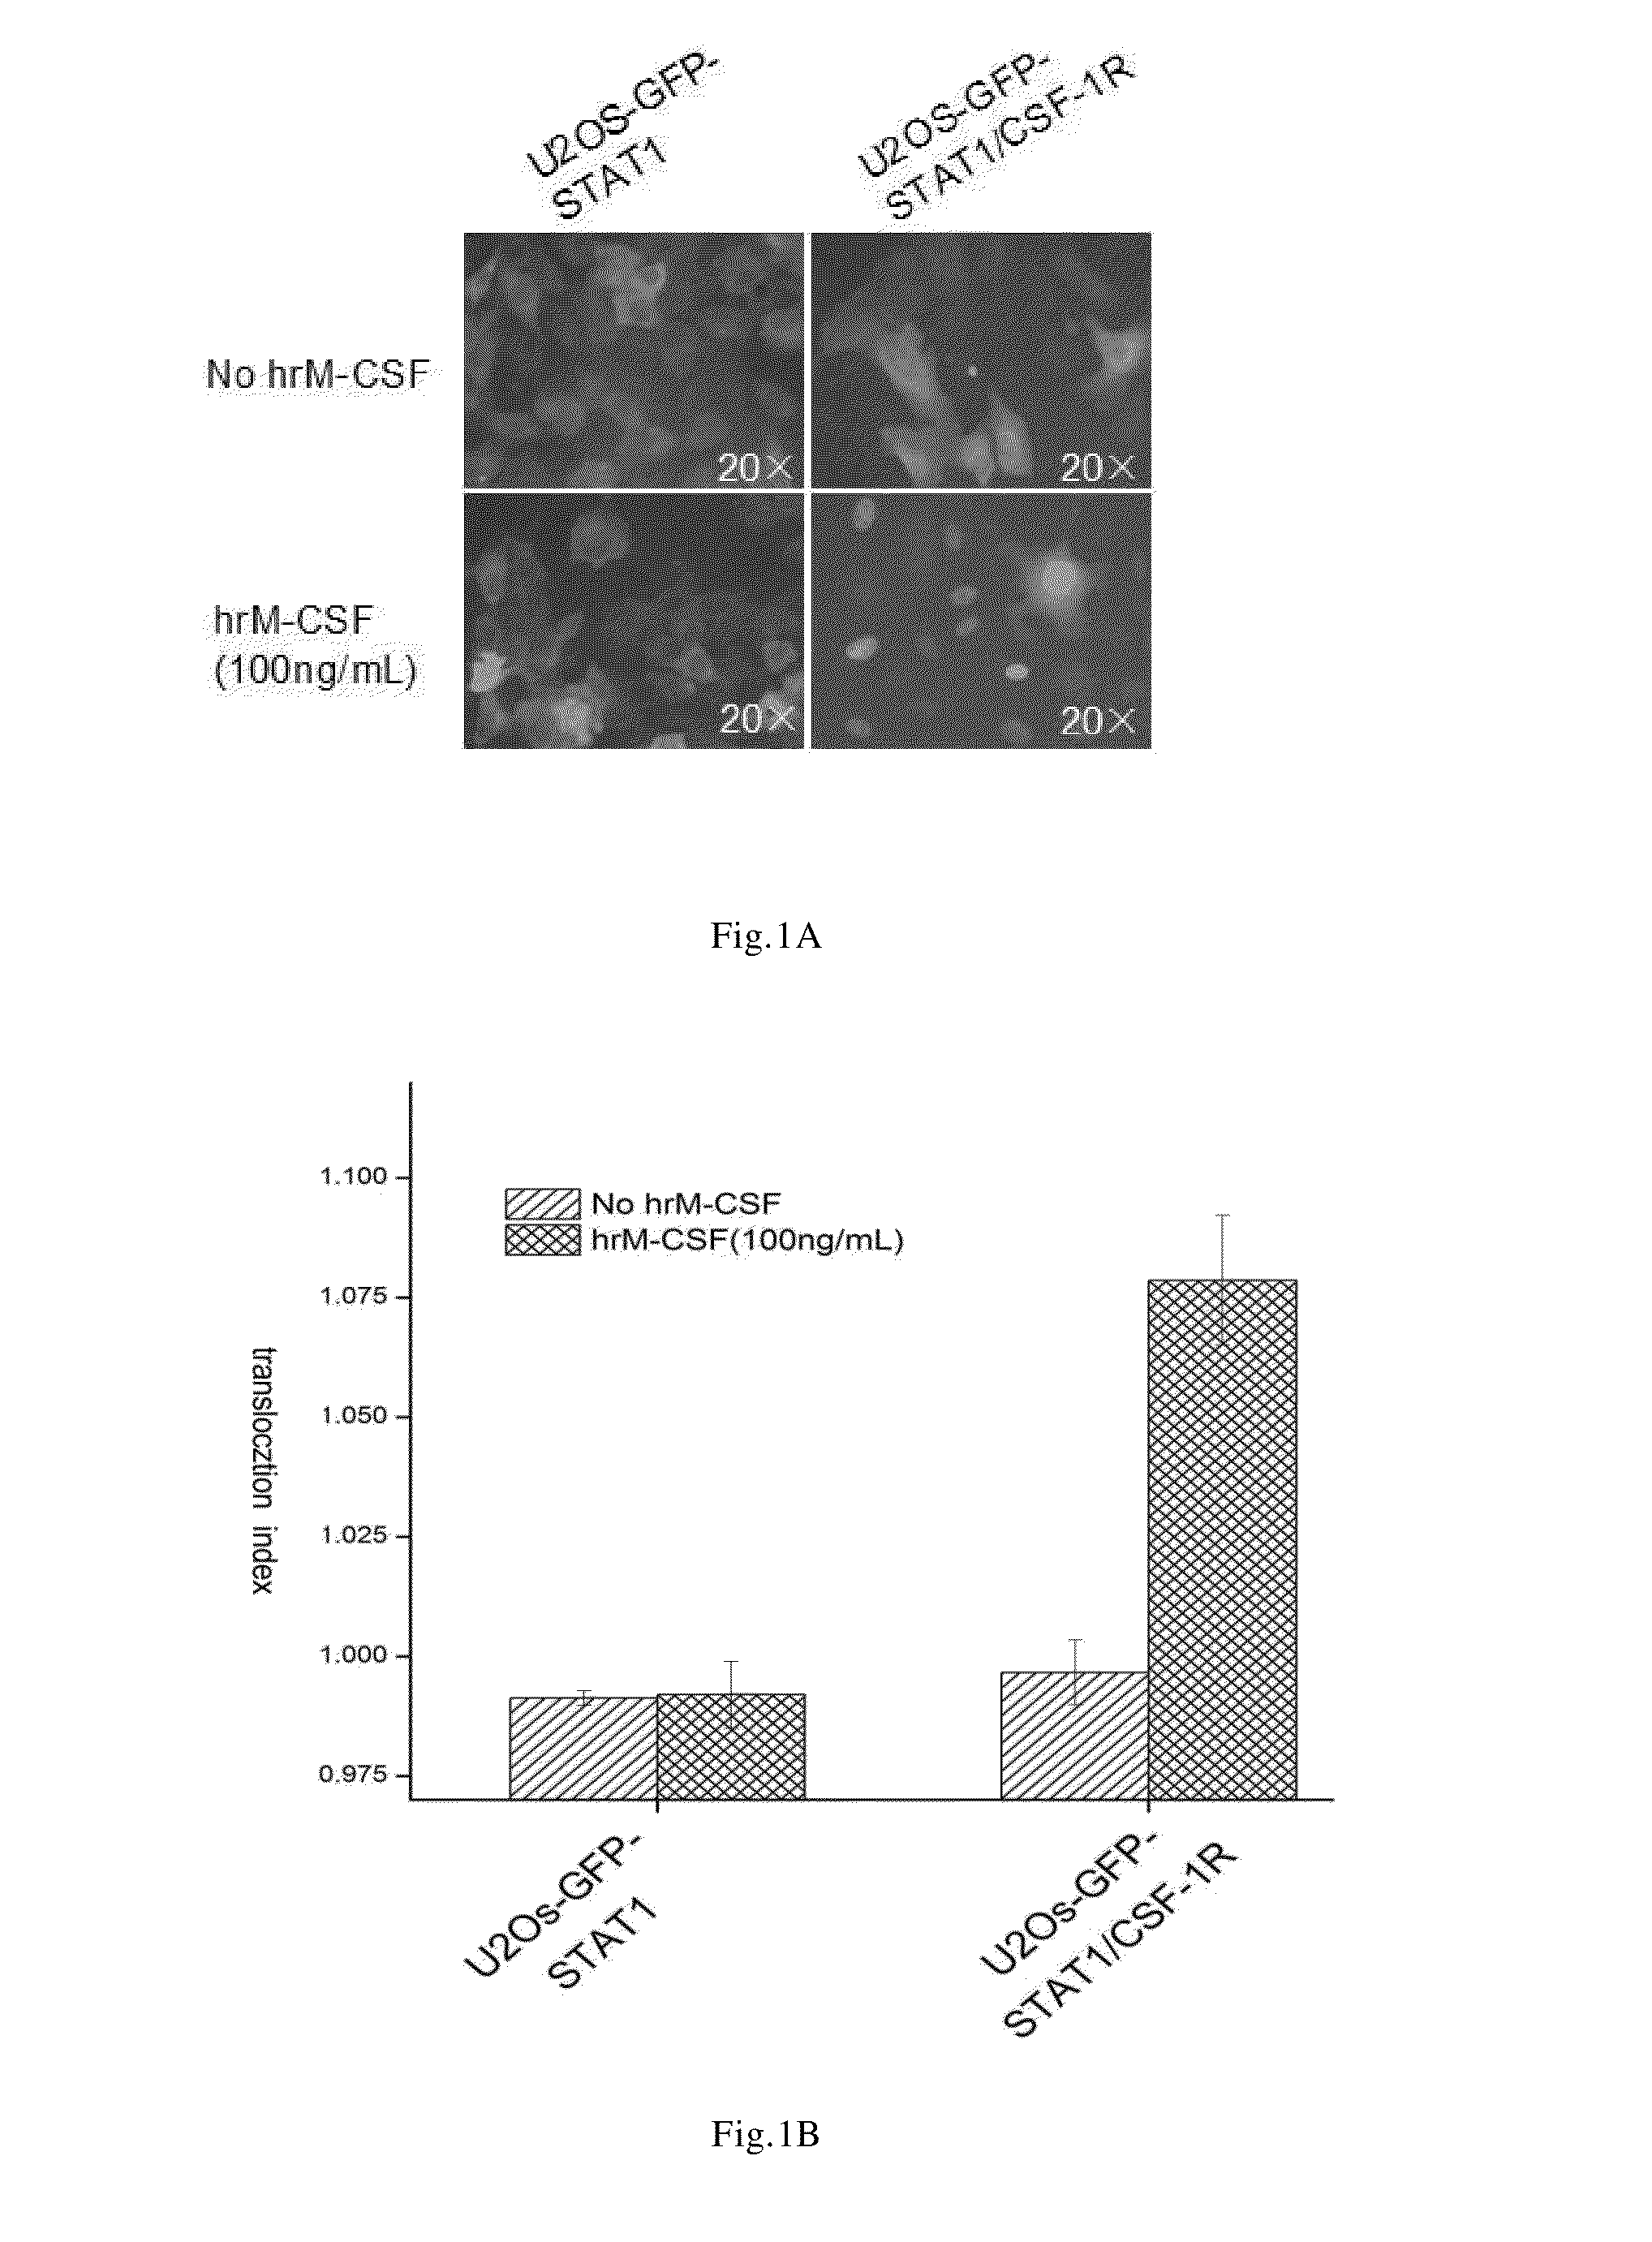 Cell Model and Method for Screening c-Fms Kinase Inhibitors